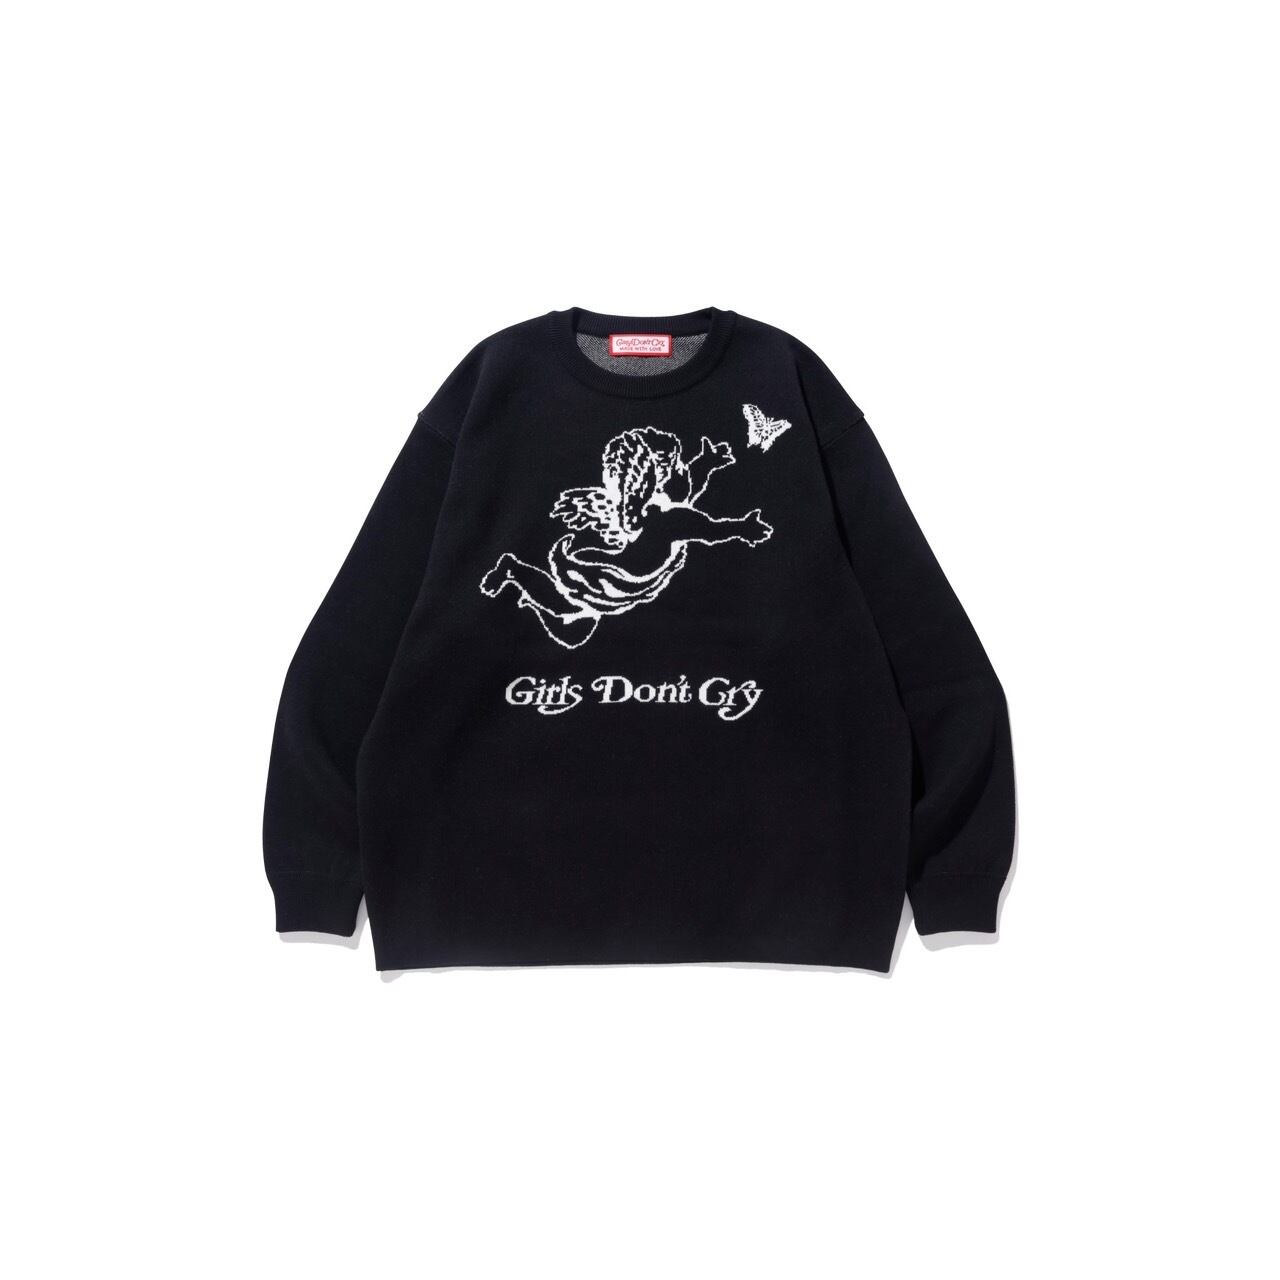 verdy girl's don't cry angel knit Lサイズ新品